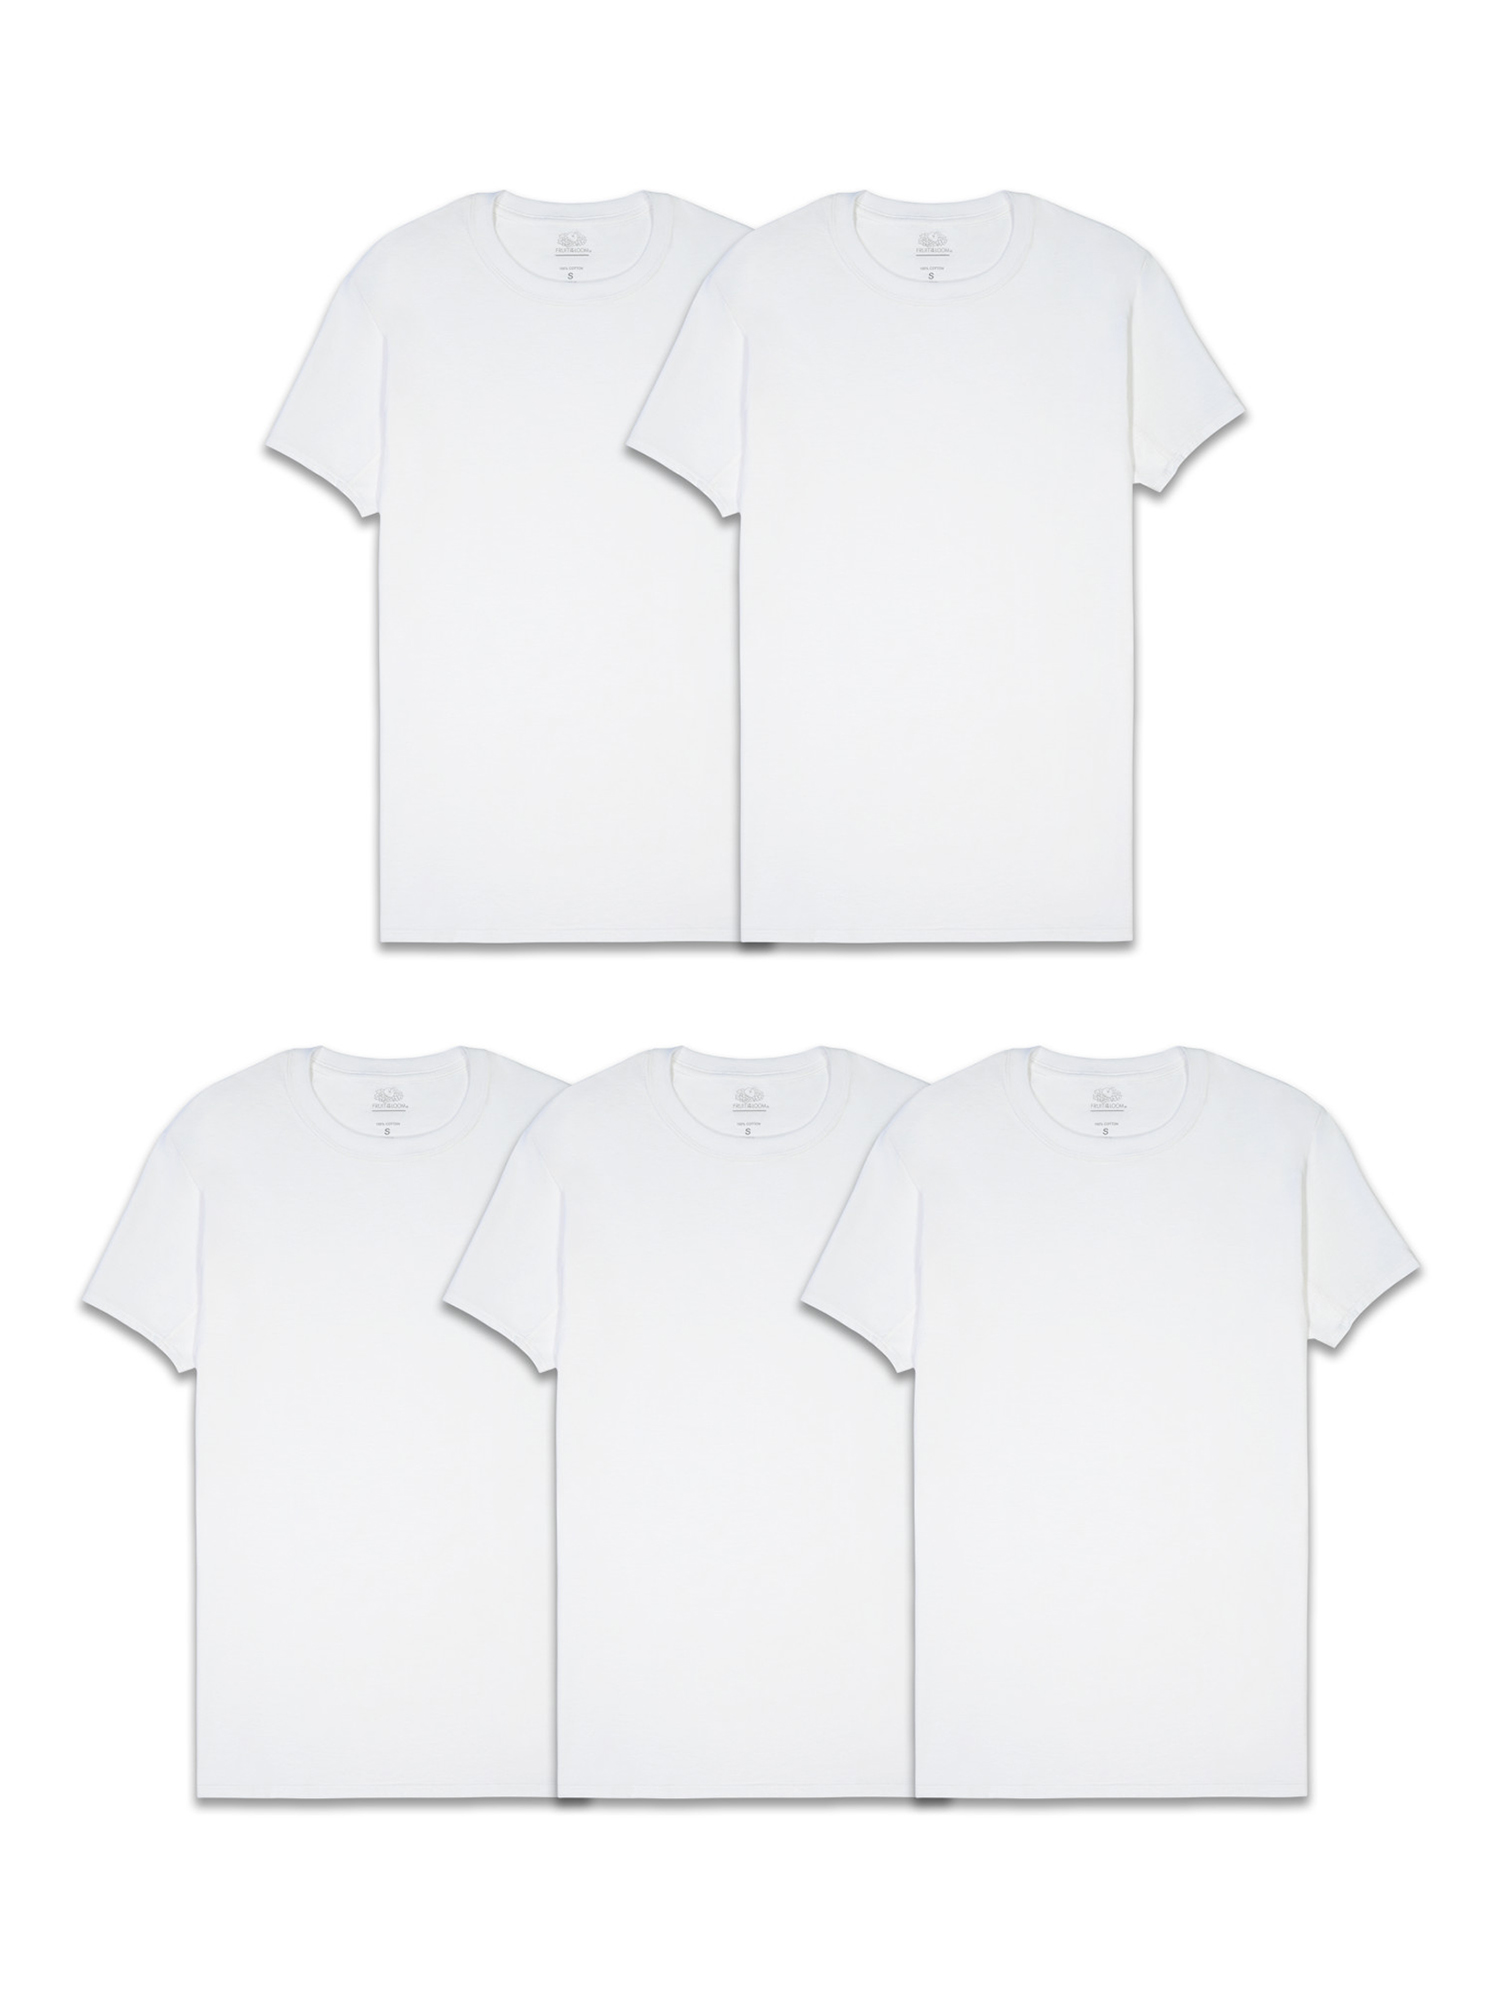 Fruit of the Loom Men's CoolZone Crew Undershirts, 5 Pack - image 1 of 11